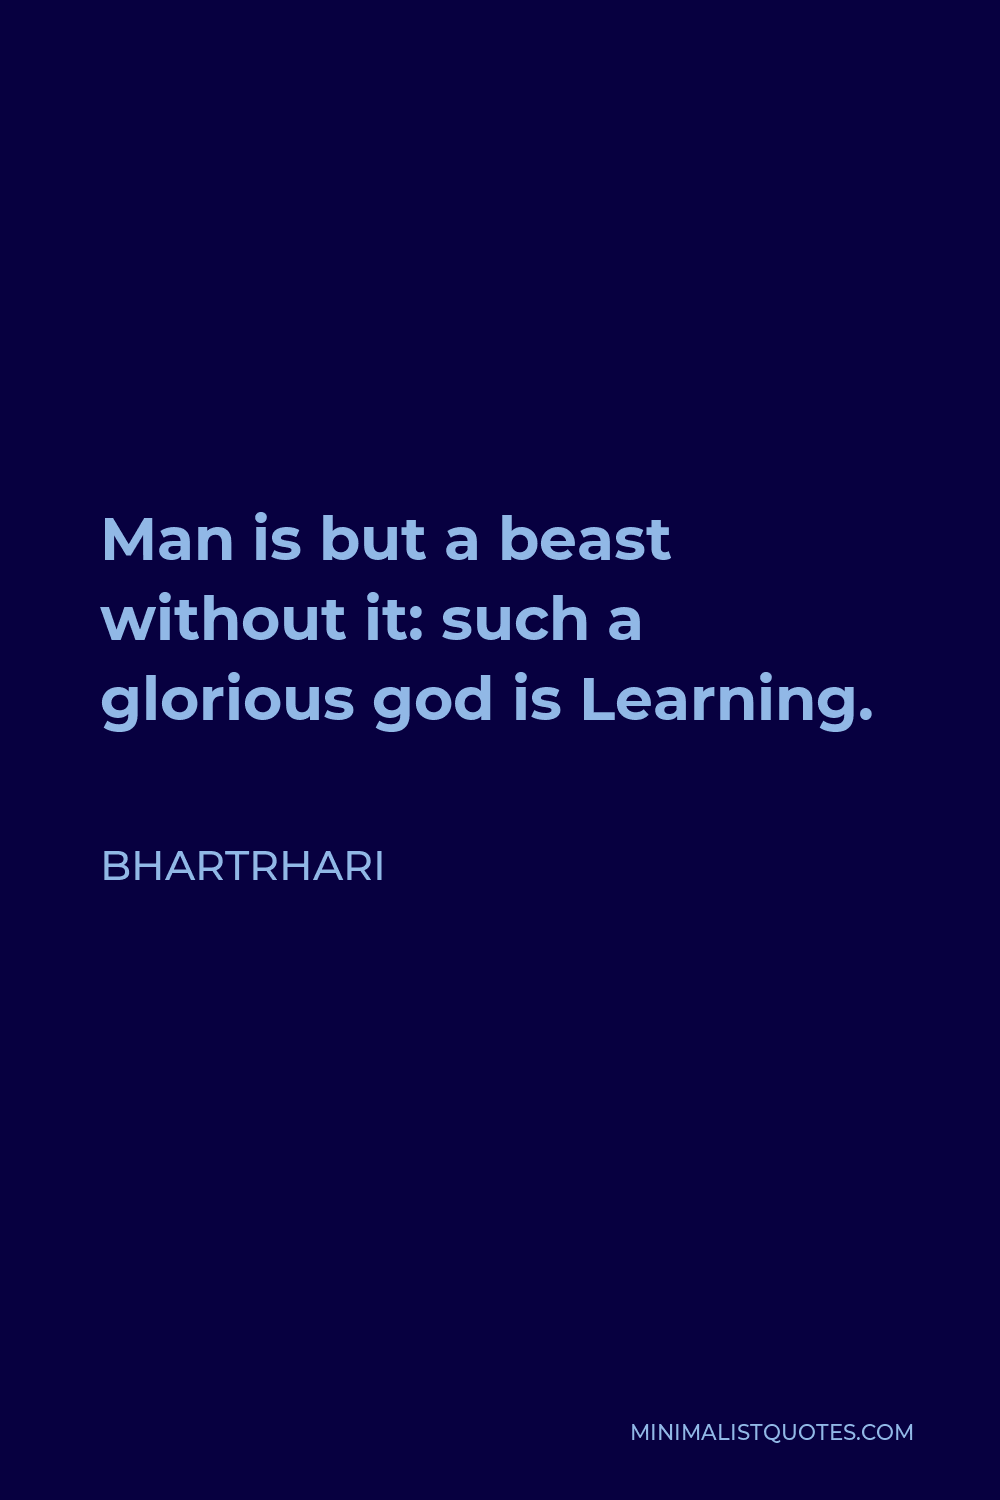 Bhartrhari Quote - Man is but a beast without it: such a glorious god is Learning.